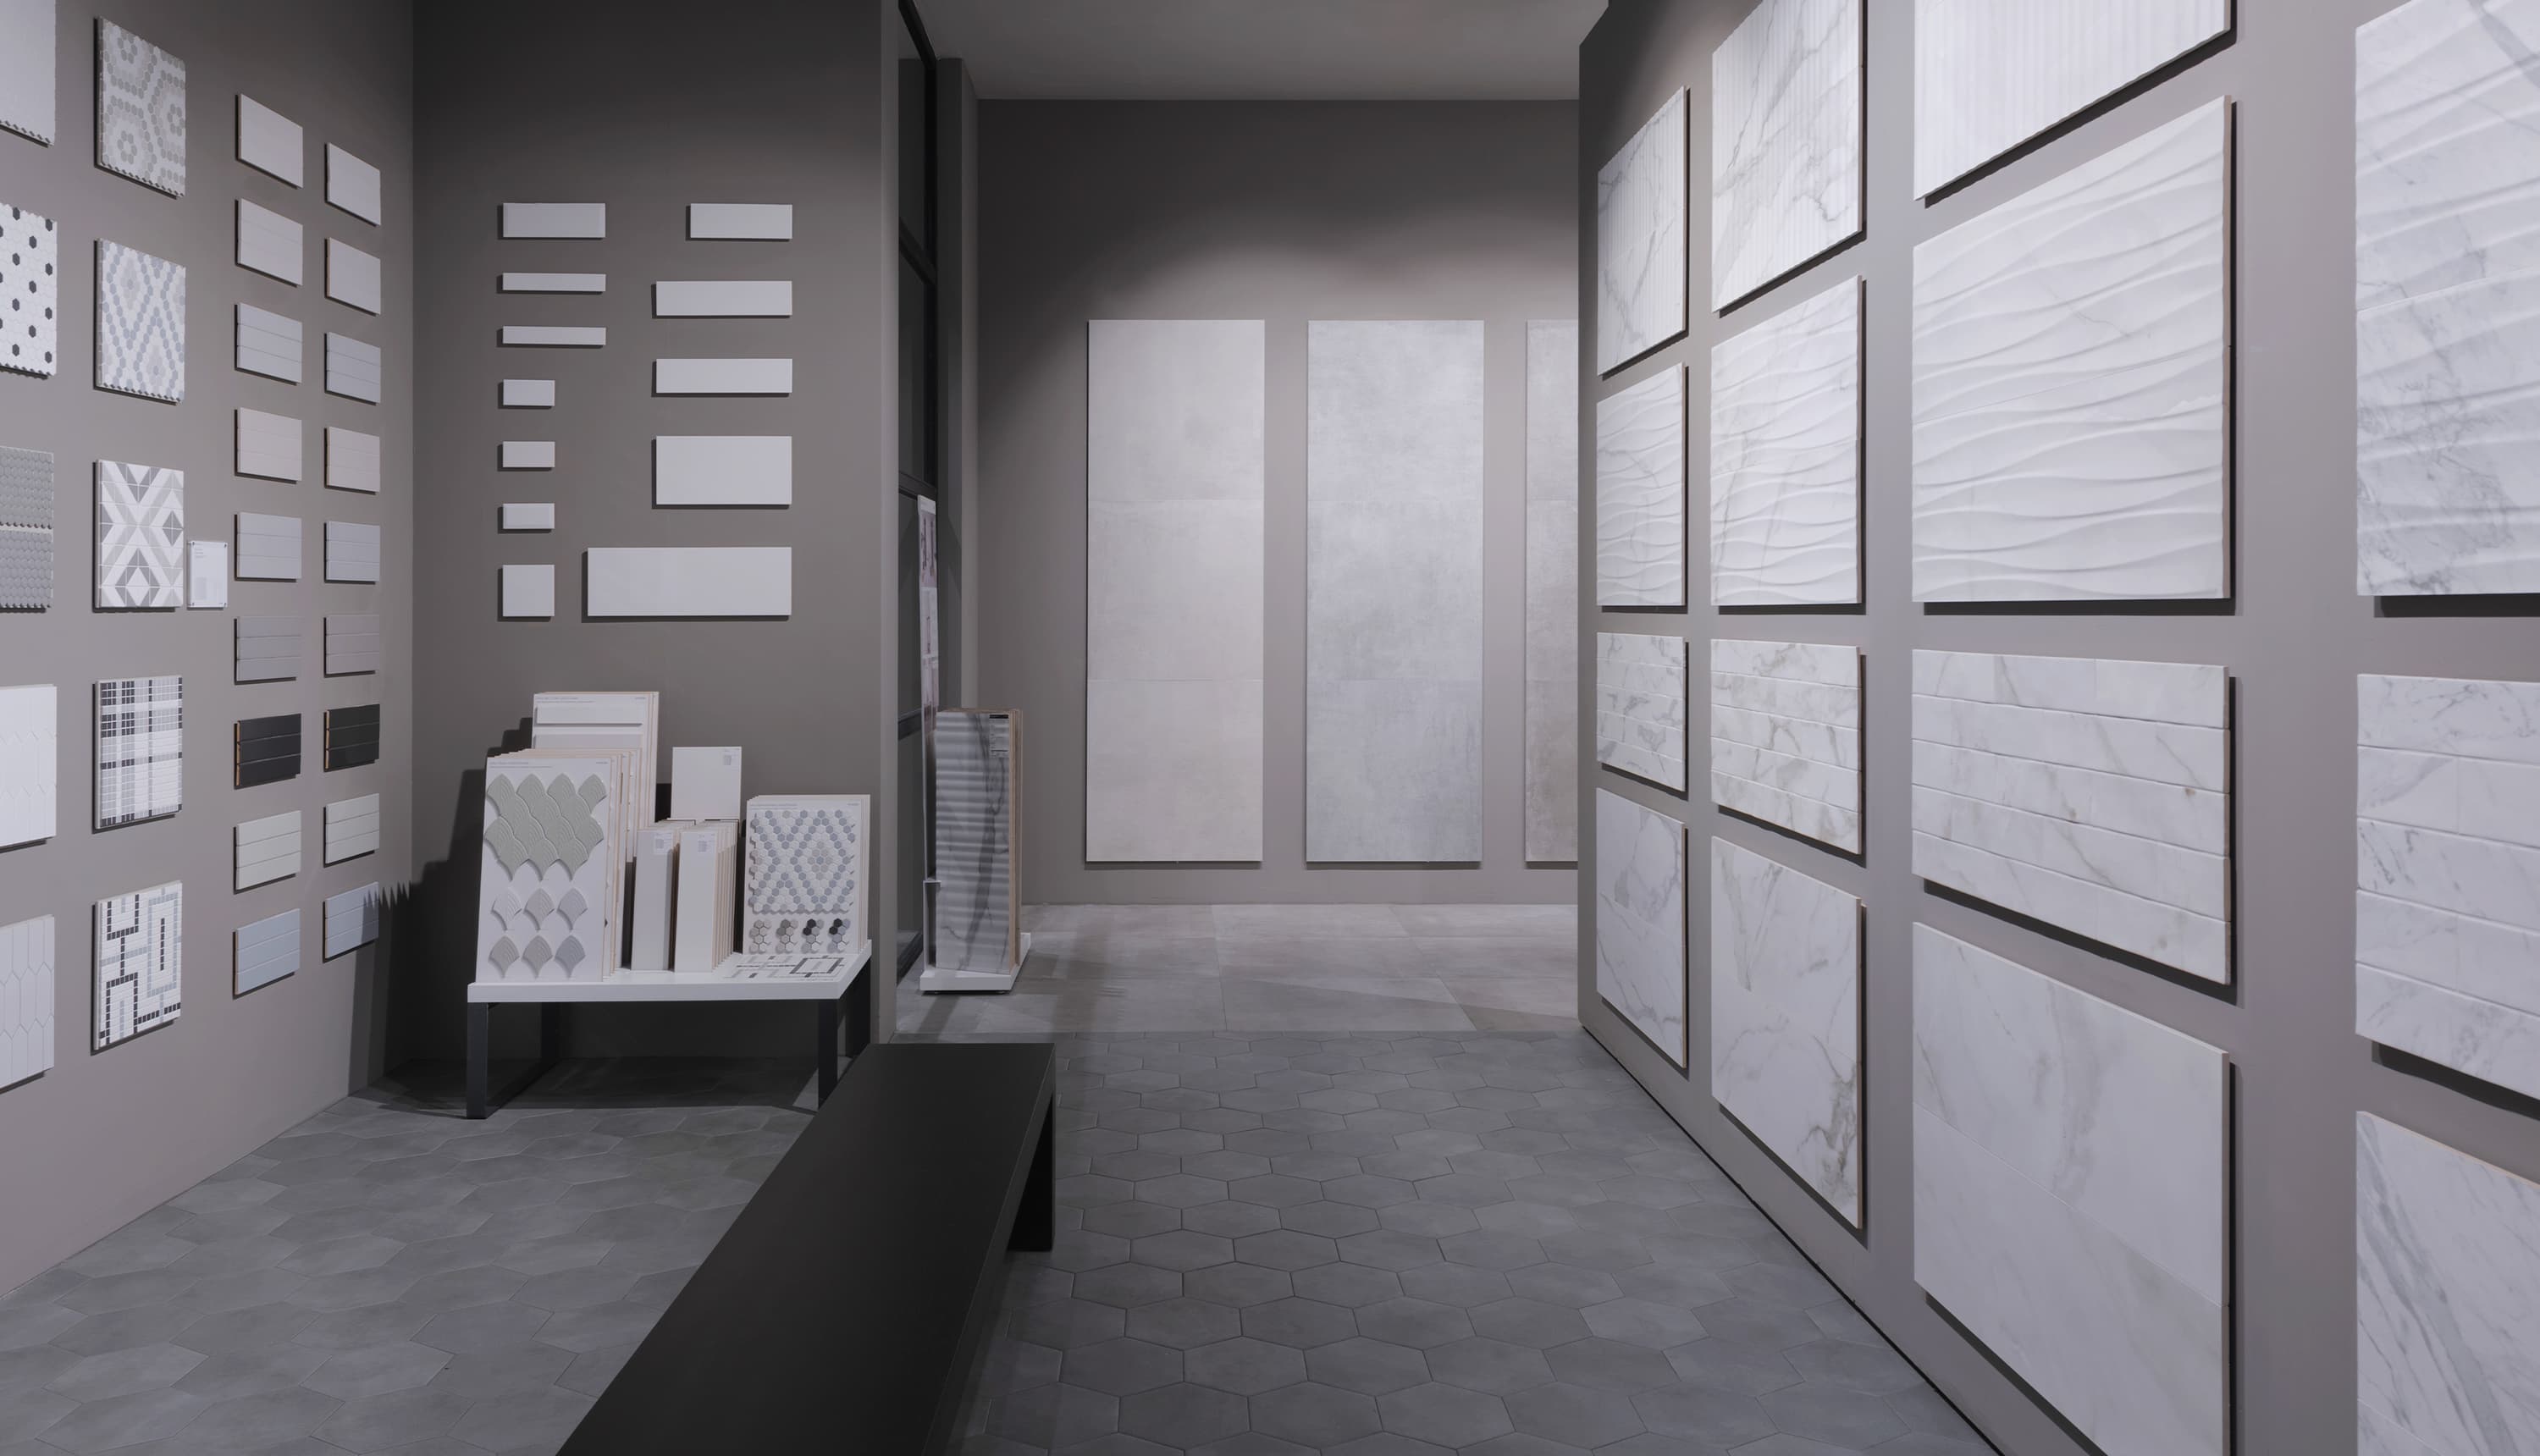 Right wall: Raffino Collection. Left wall: Soho Collection. Back wall: Industria.